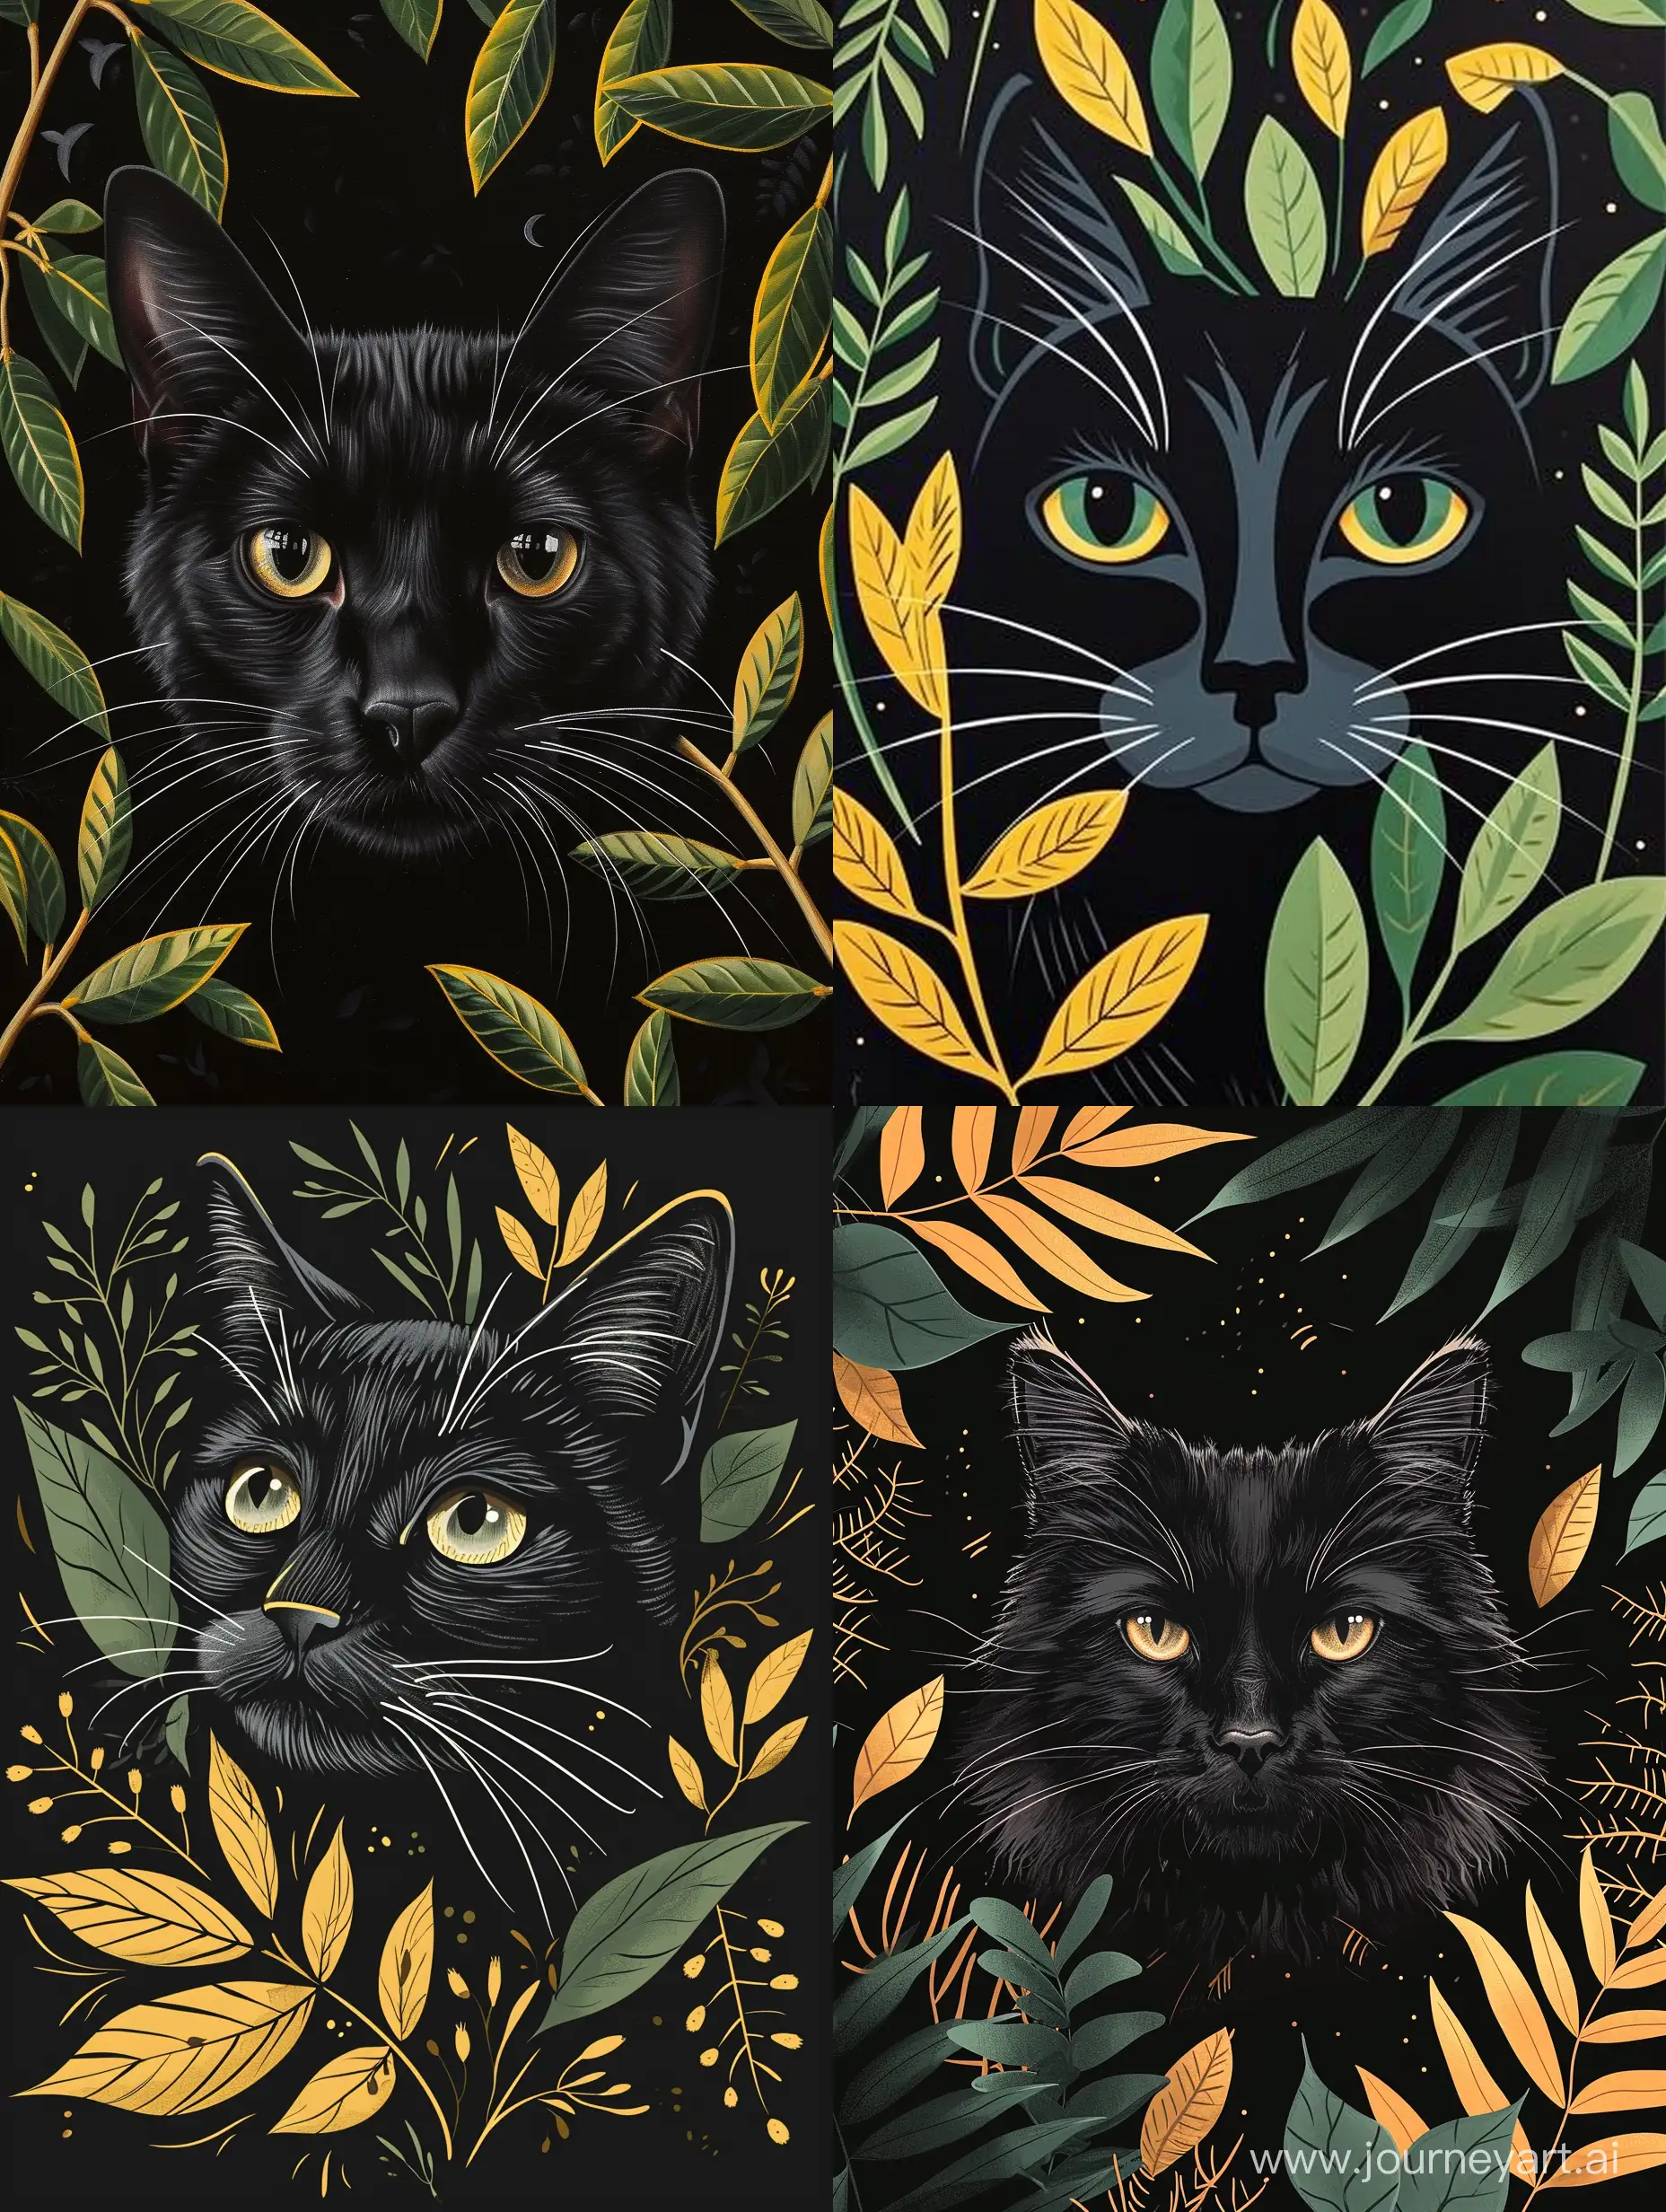 Fine art of black elegant cat face  Location: black background with green and yellow leaves Style: fine art